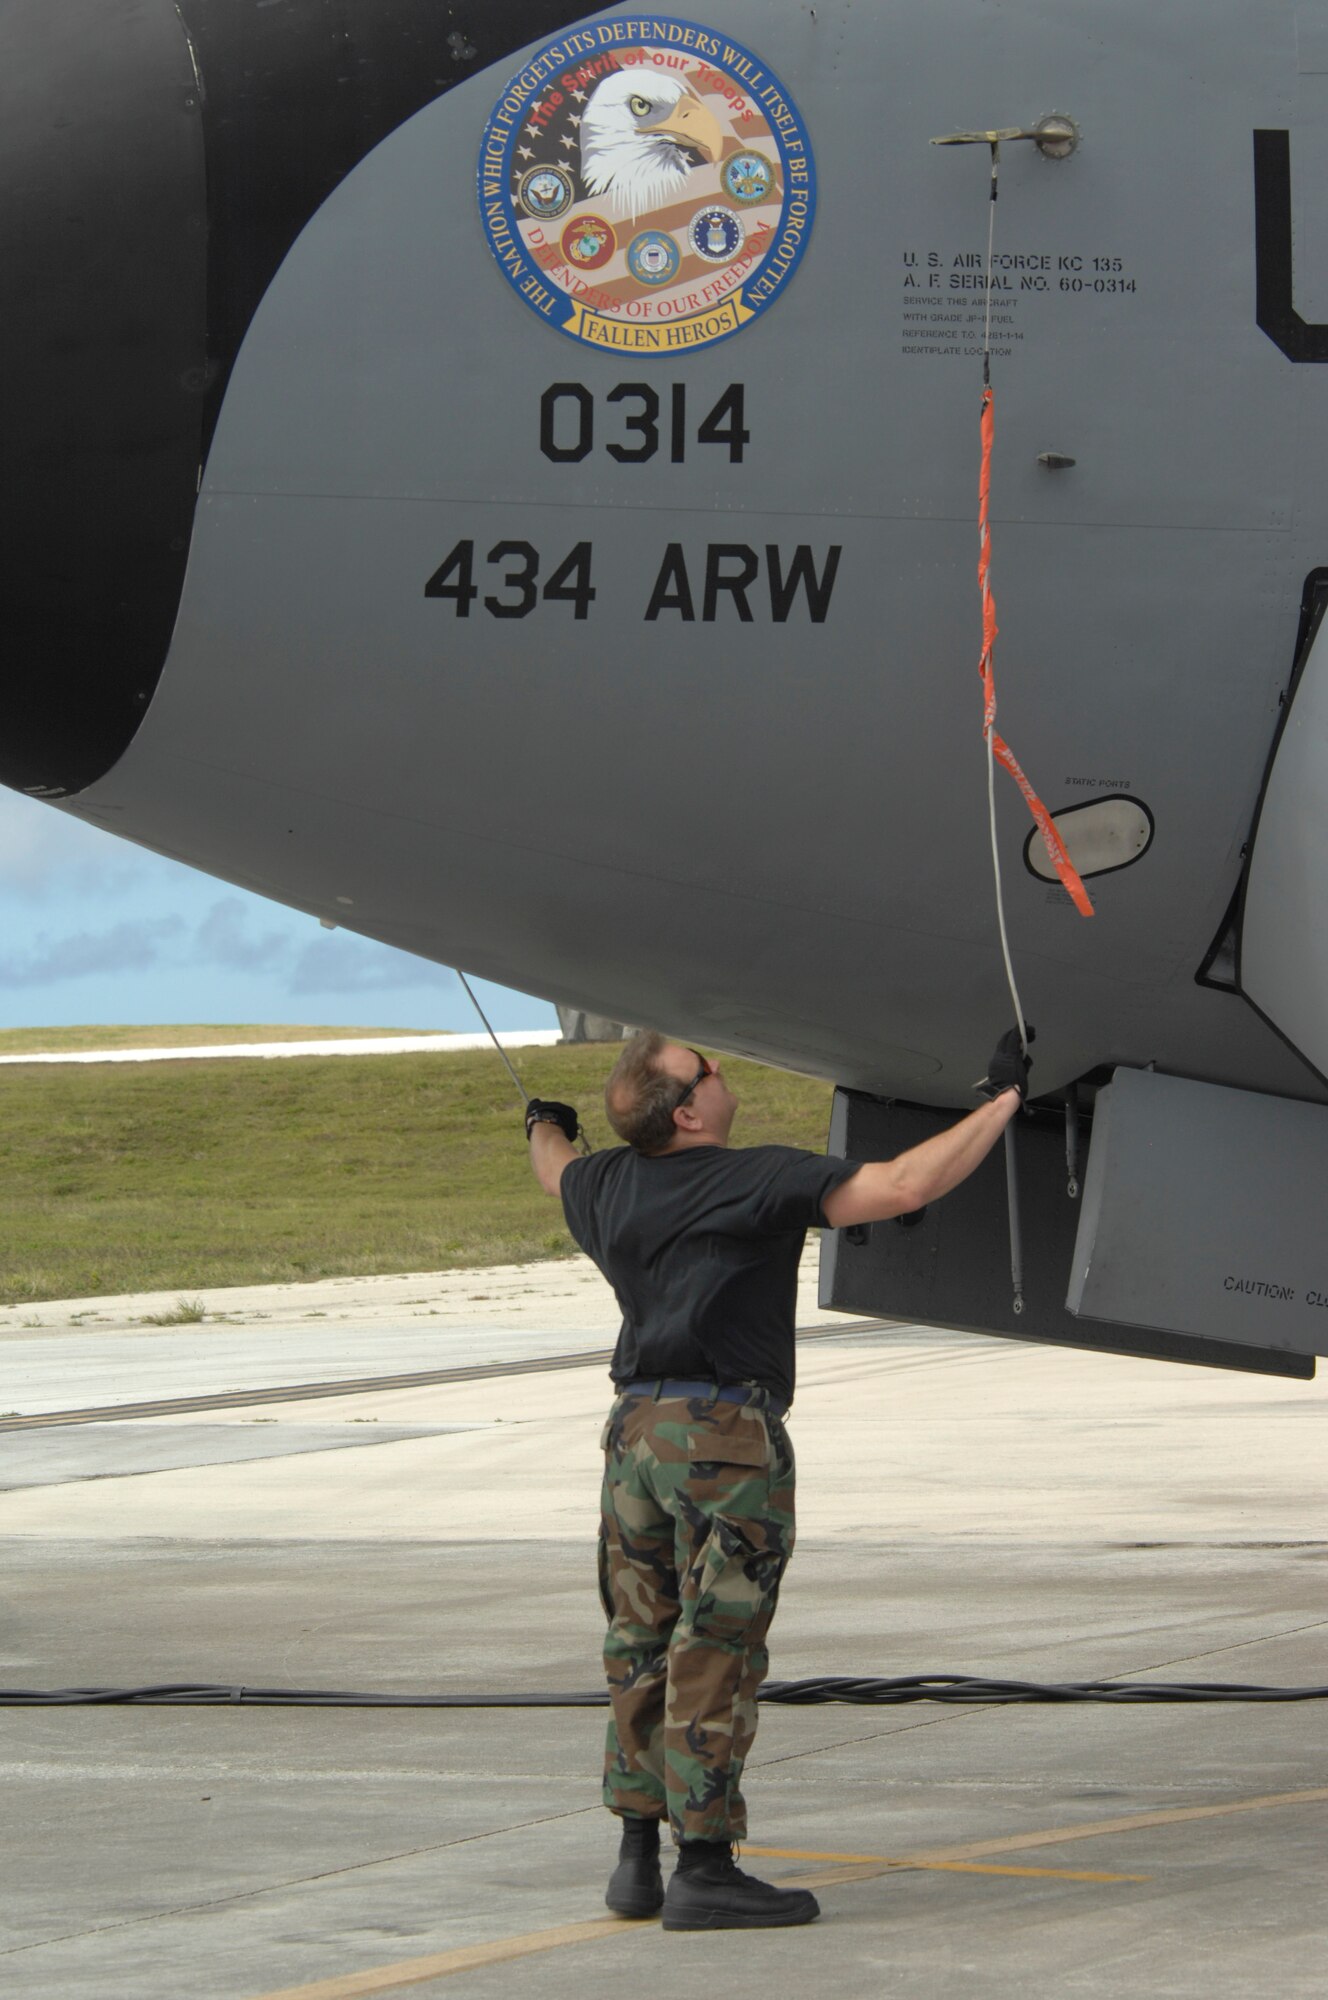 Tech. Sgt. Carl Steele, 434th Air Refueling Wing crew chief, Grissom Air Reserve Base, Ind., cinches down an emergency marker on a KC-135R Stratotanker after arrival at Andersen Air Force Base, Guam Dec. 31. The 434th Air Refueling Wing from Grissom ARW is deployed to Andersen to provide Pacific theater refueling operations and is replacing the 171st ARW Pennsylvania Air National Guard.

(U.S. Air Force photo/ Master Sgt. Kevin J. Gruenwald) released






















  












 











































  












 

























